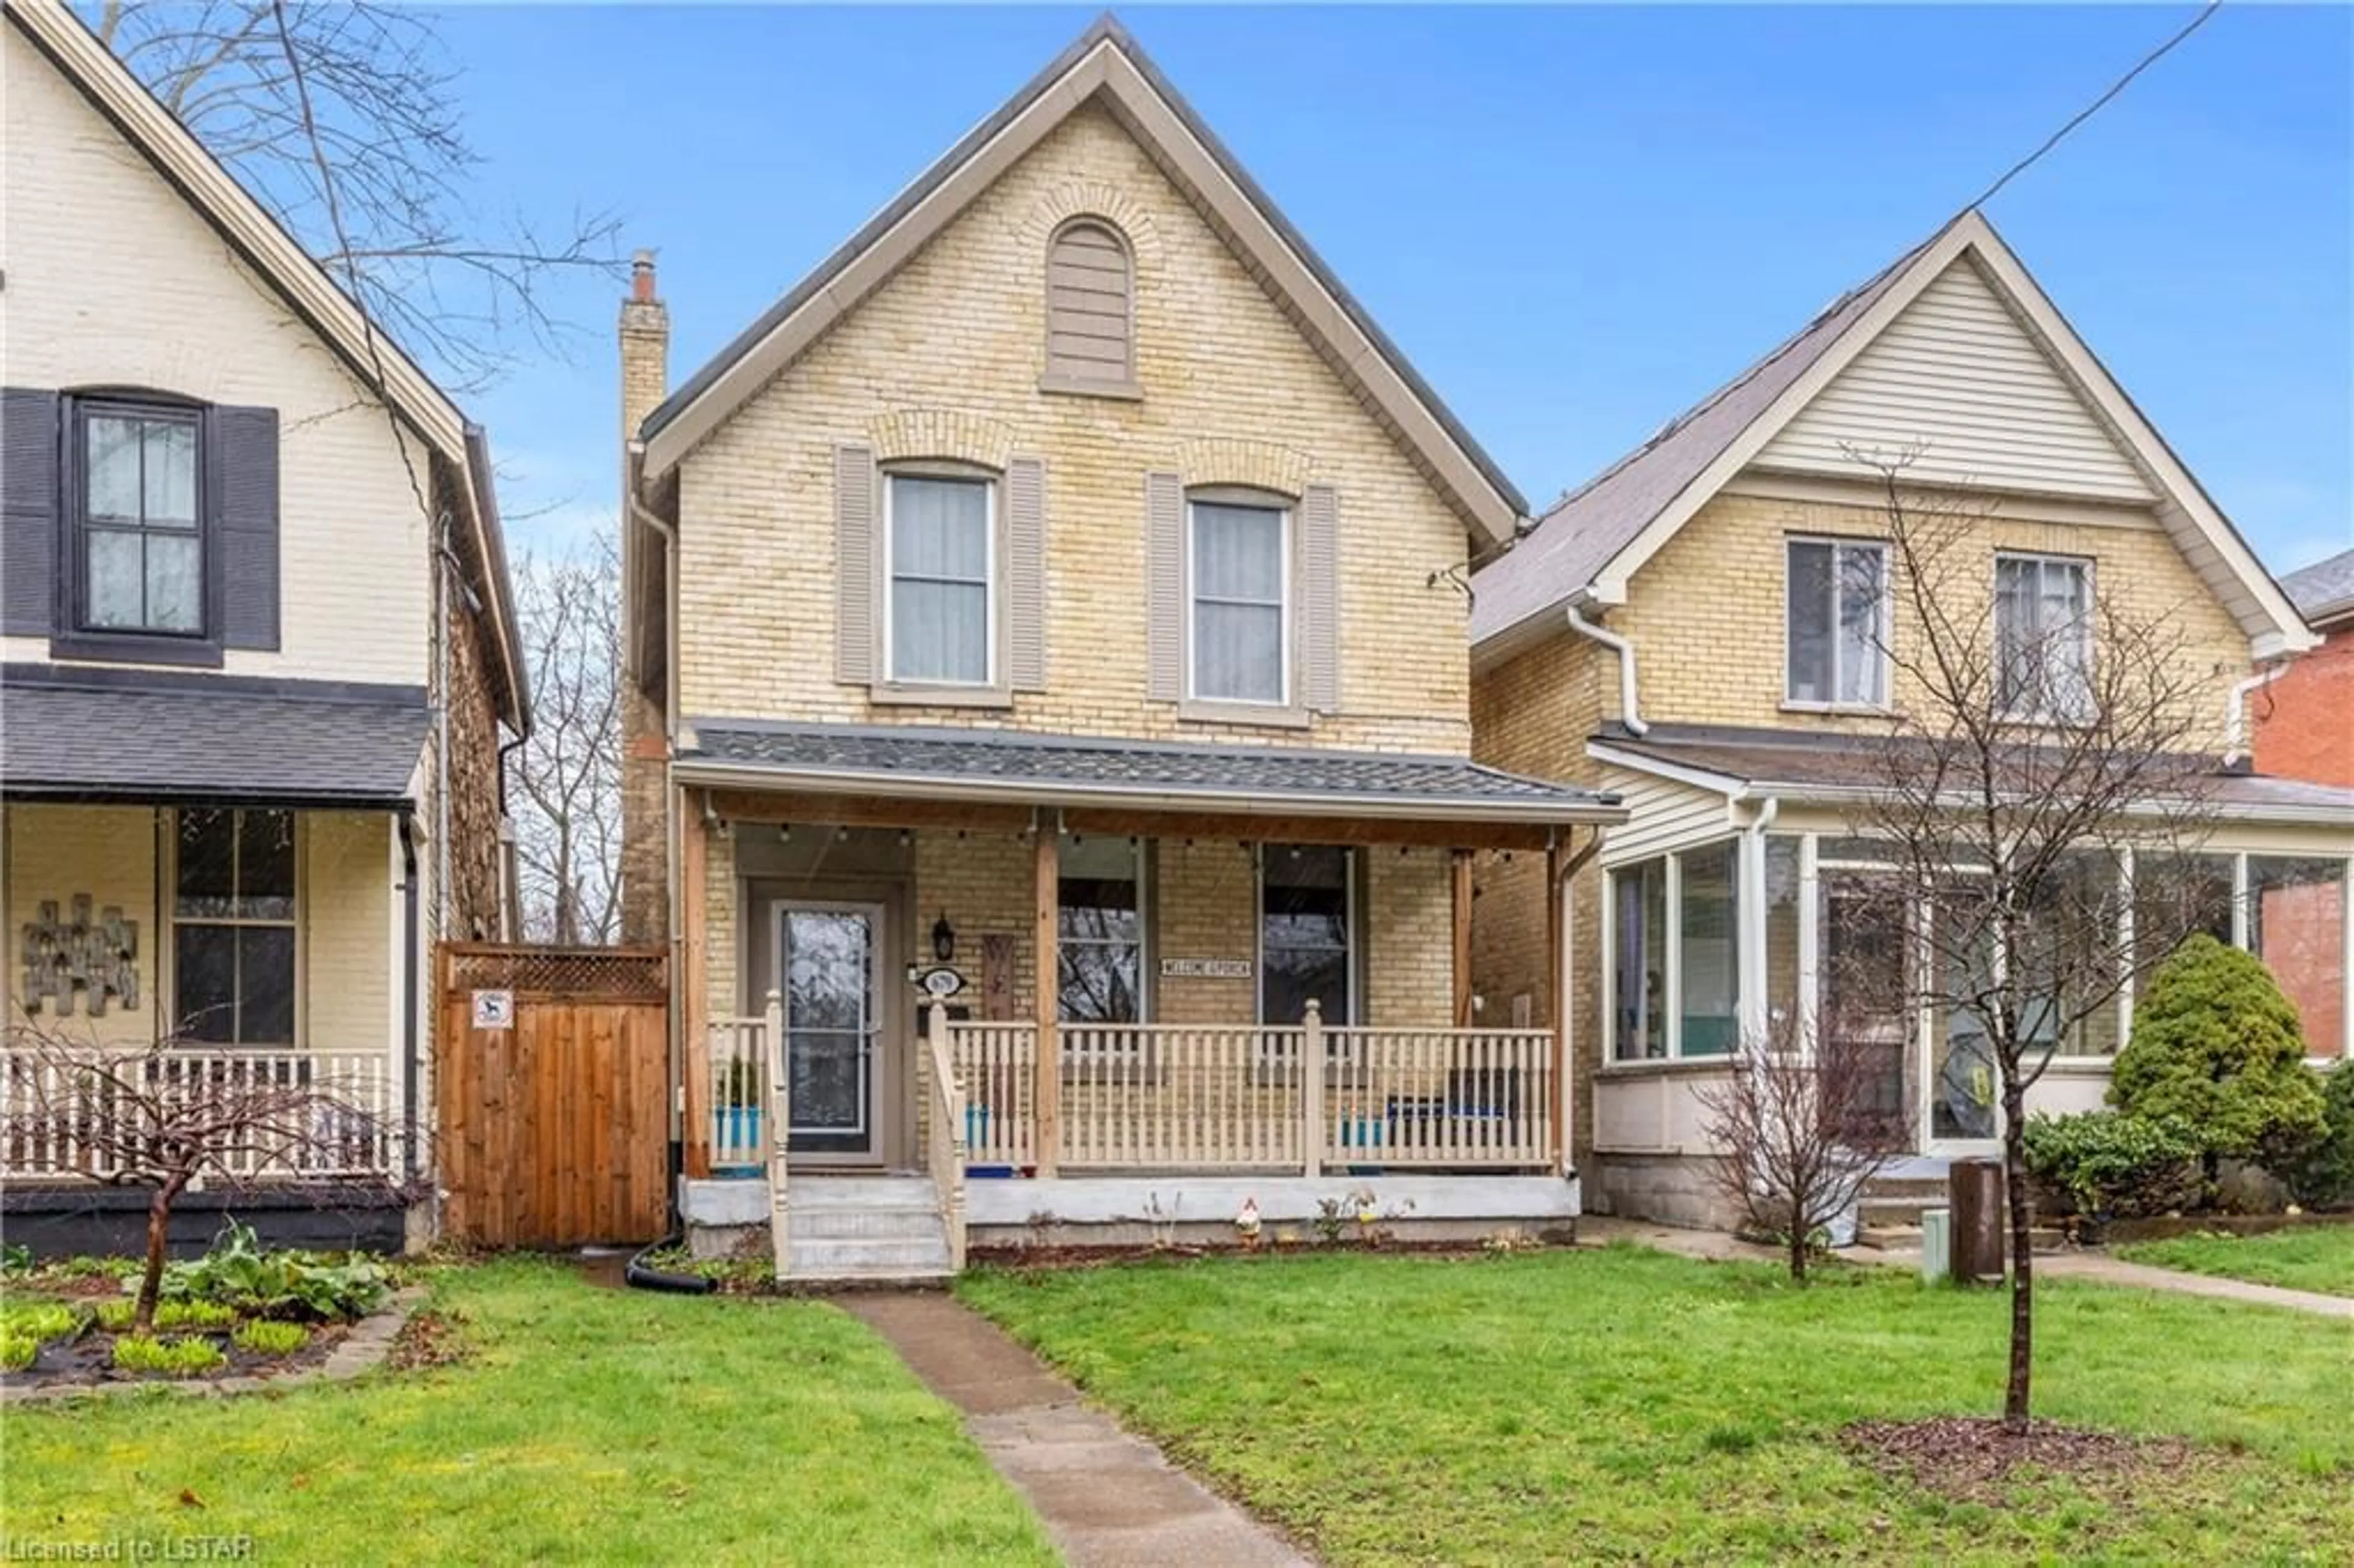 Frontside or backside of a home for 679 Colborne St, London Ontario N6A 3Z4